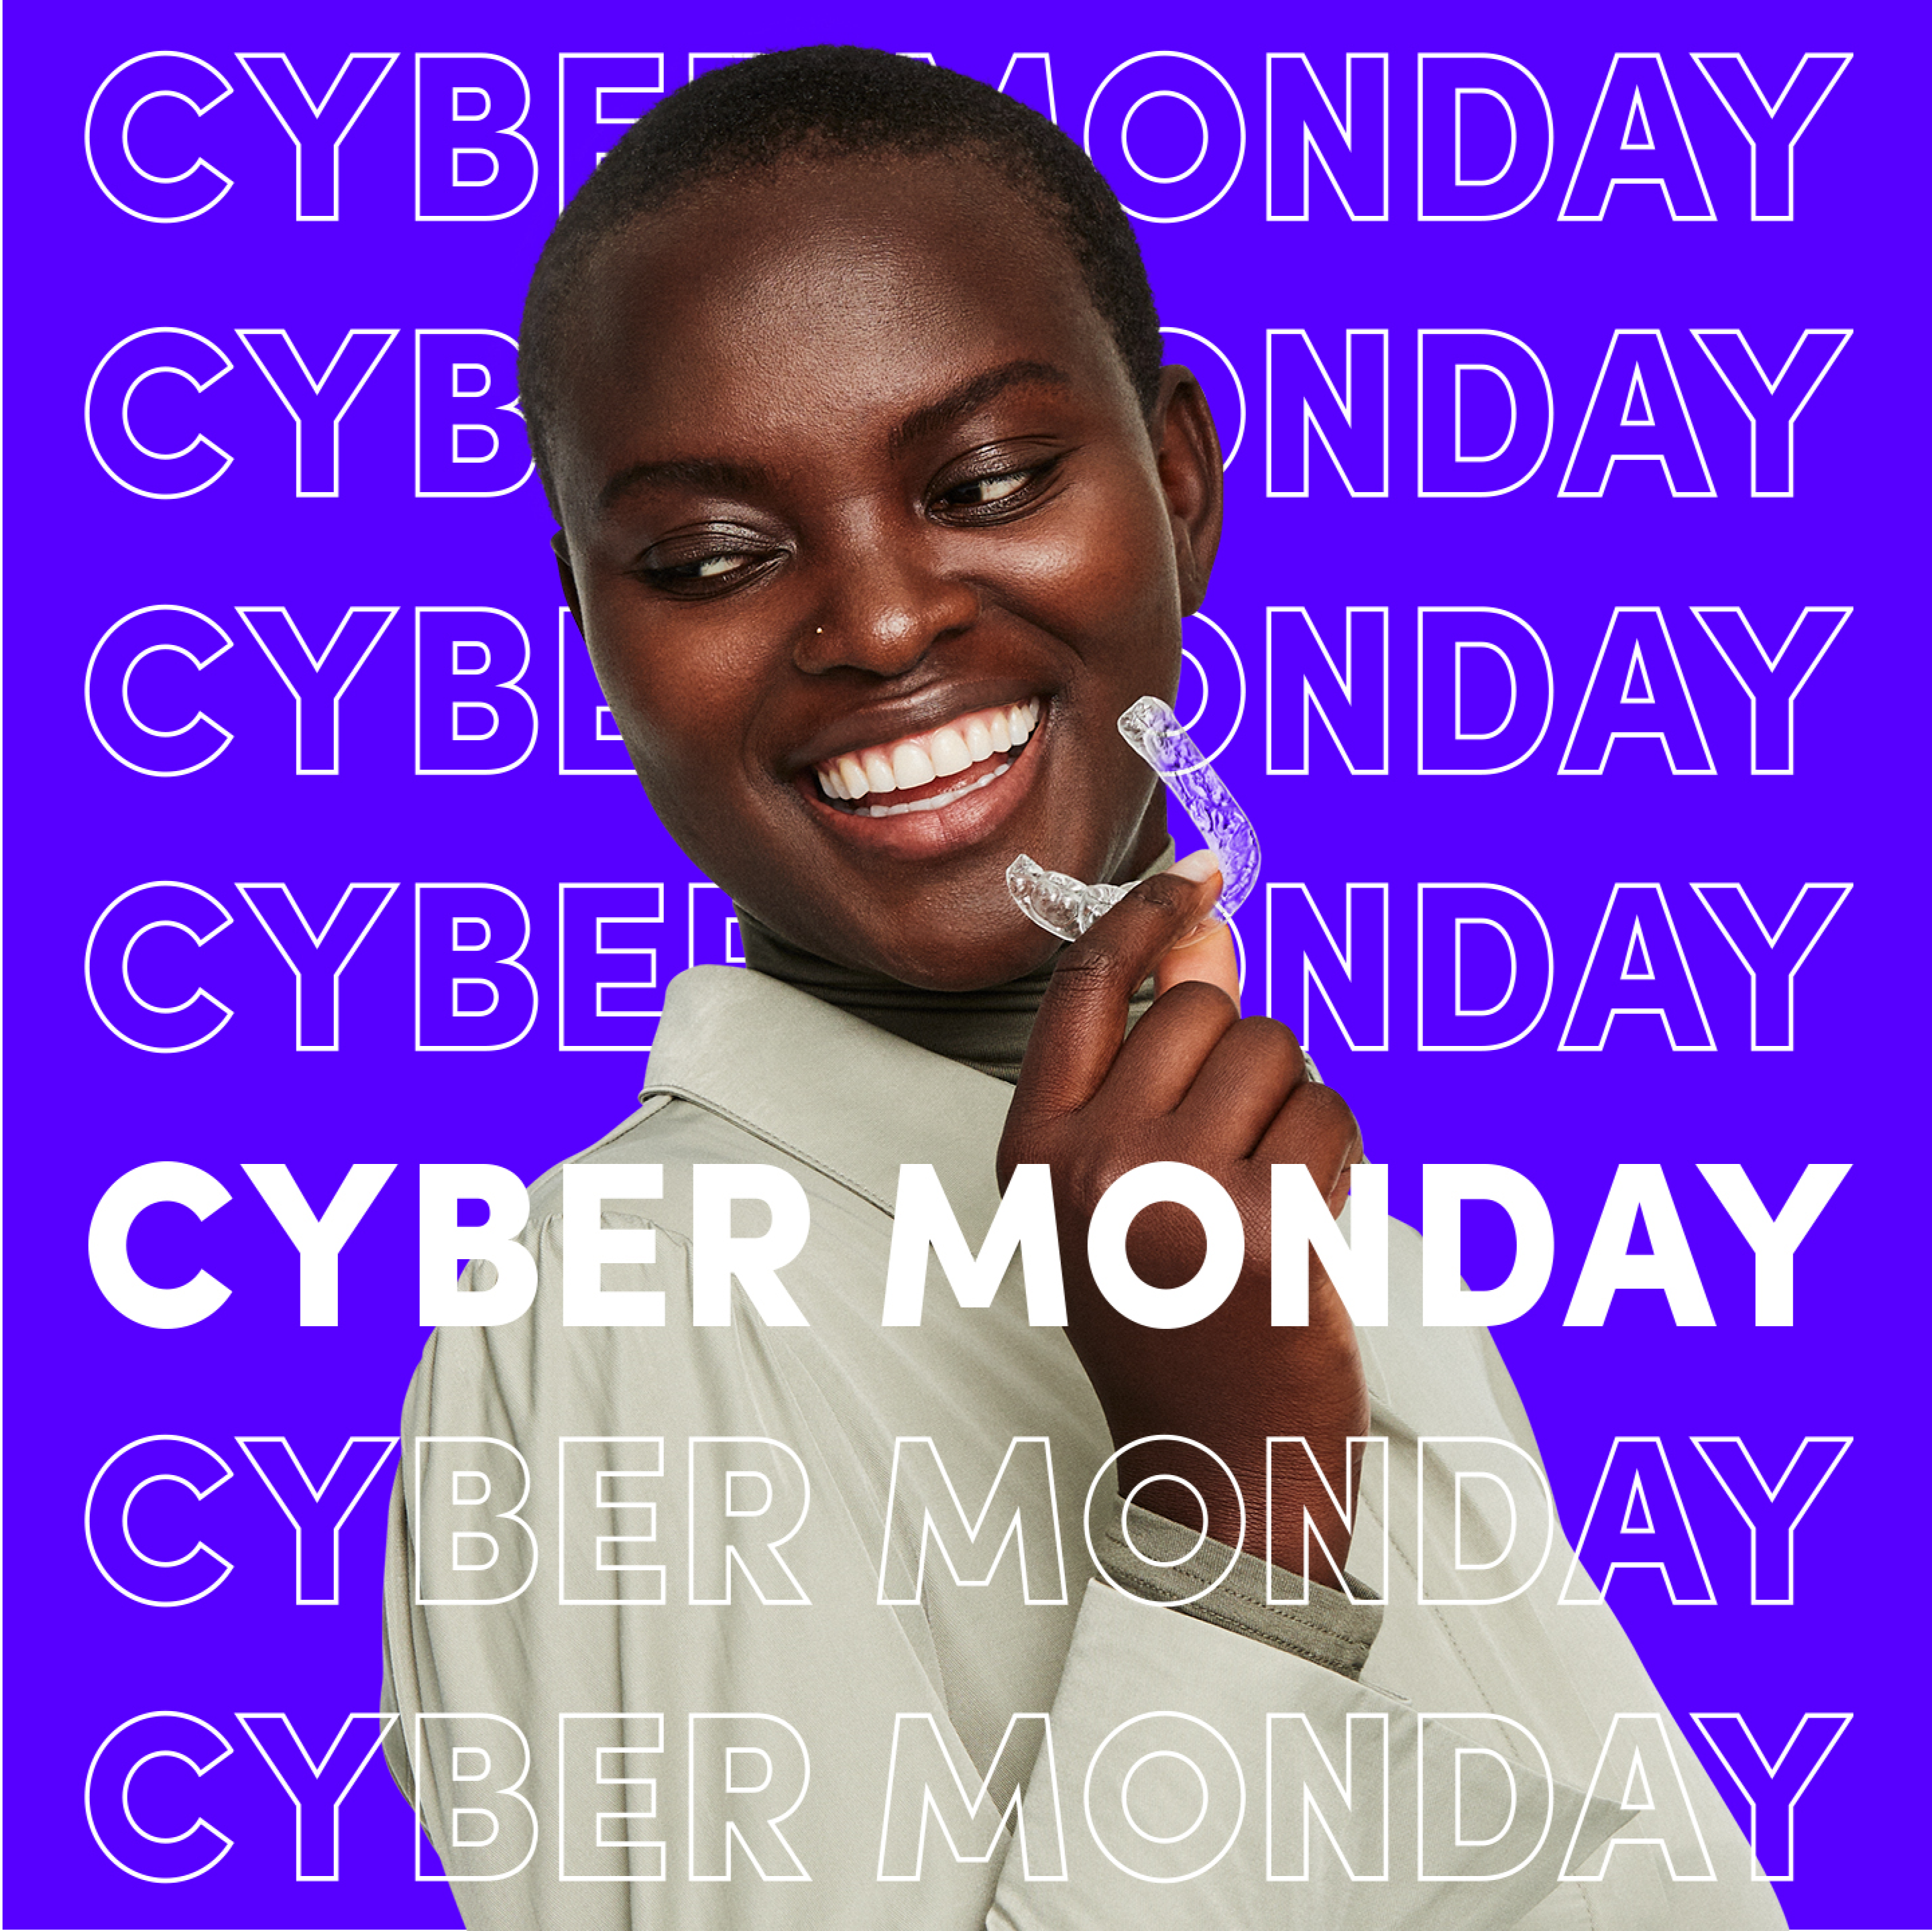 Cyber Monday 2021 - Smiling woman holding smiledirectclub aligner with cyber monday pattern on purple background